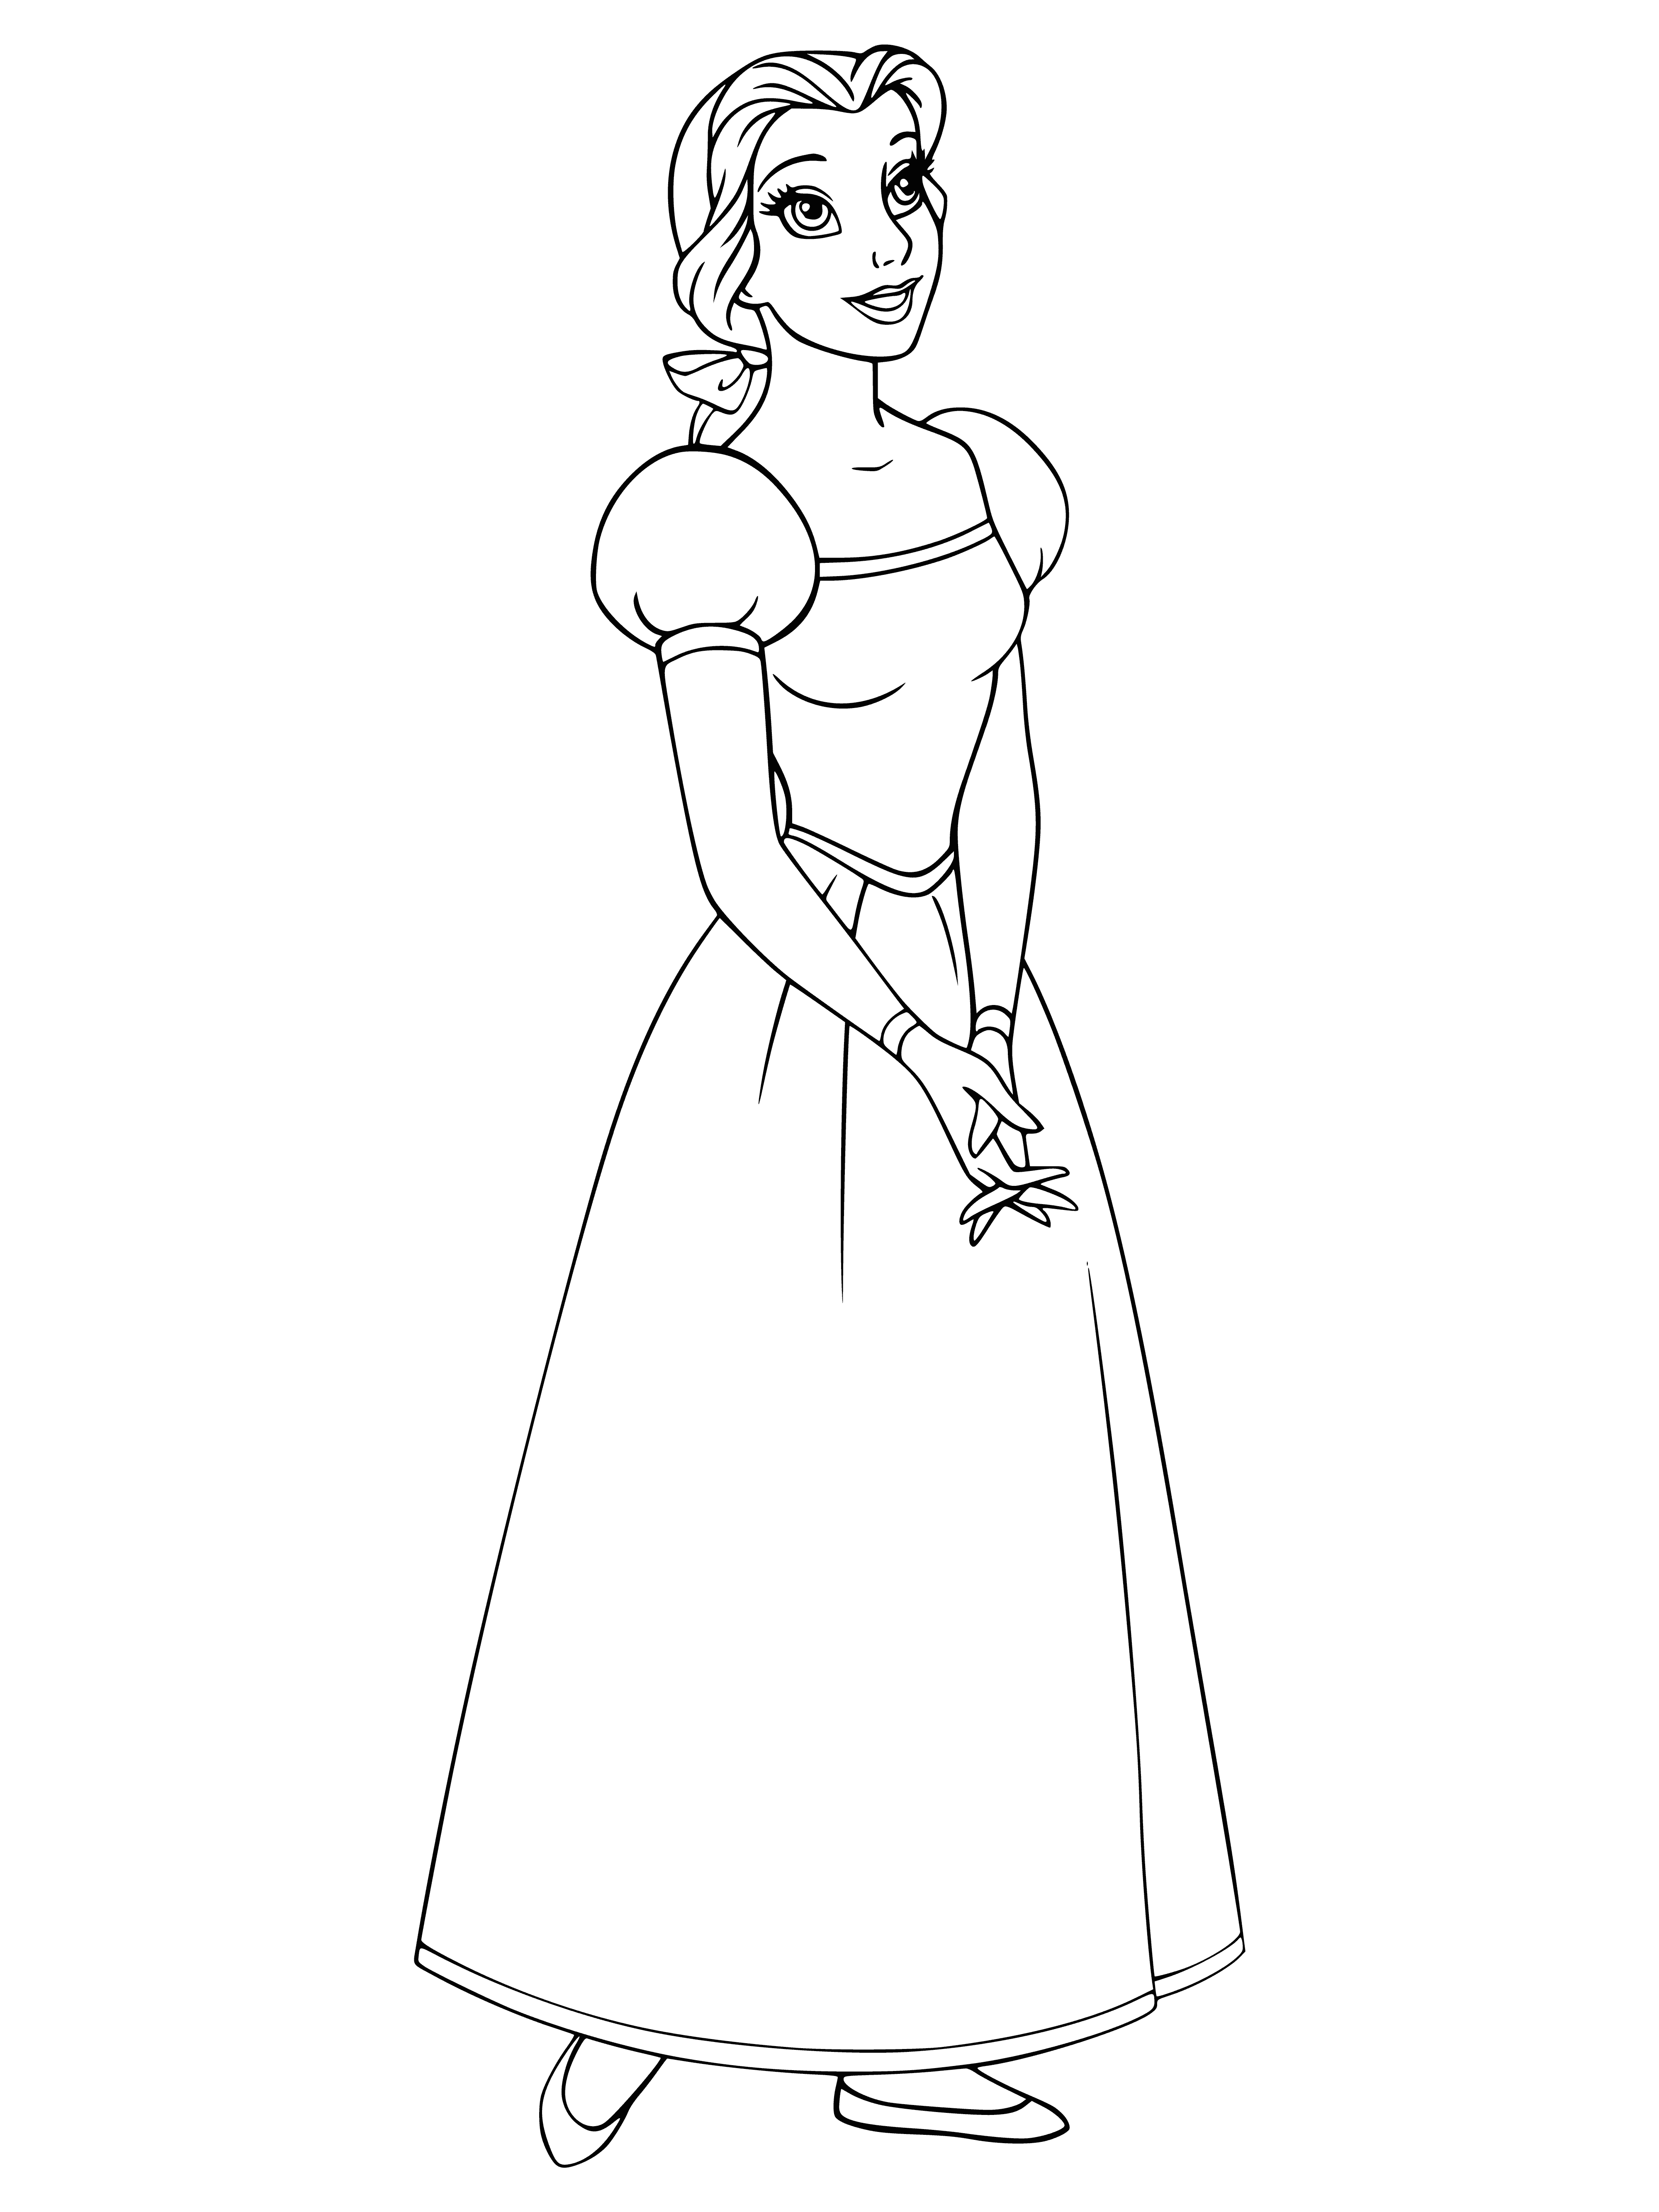 coloring page: Belle reads in front of a window, dreaming with curly brown hair & glasses on her face.